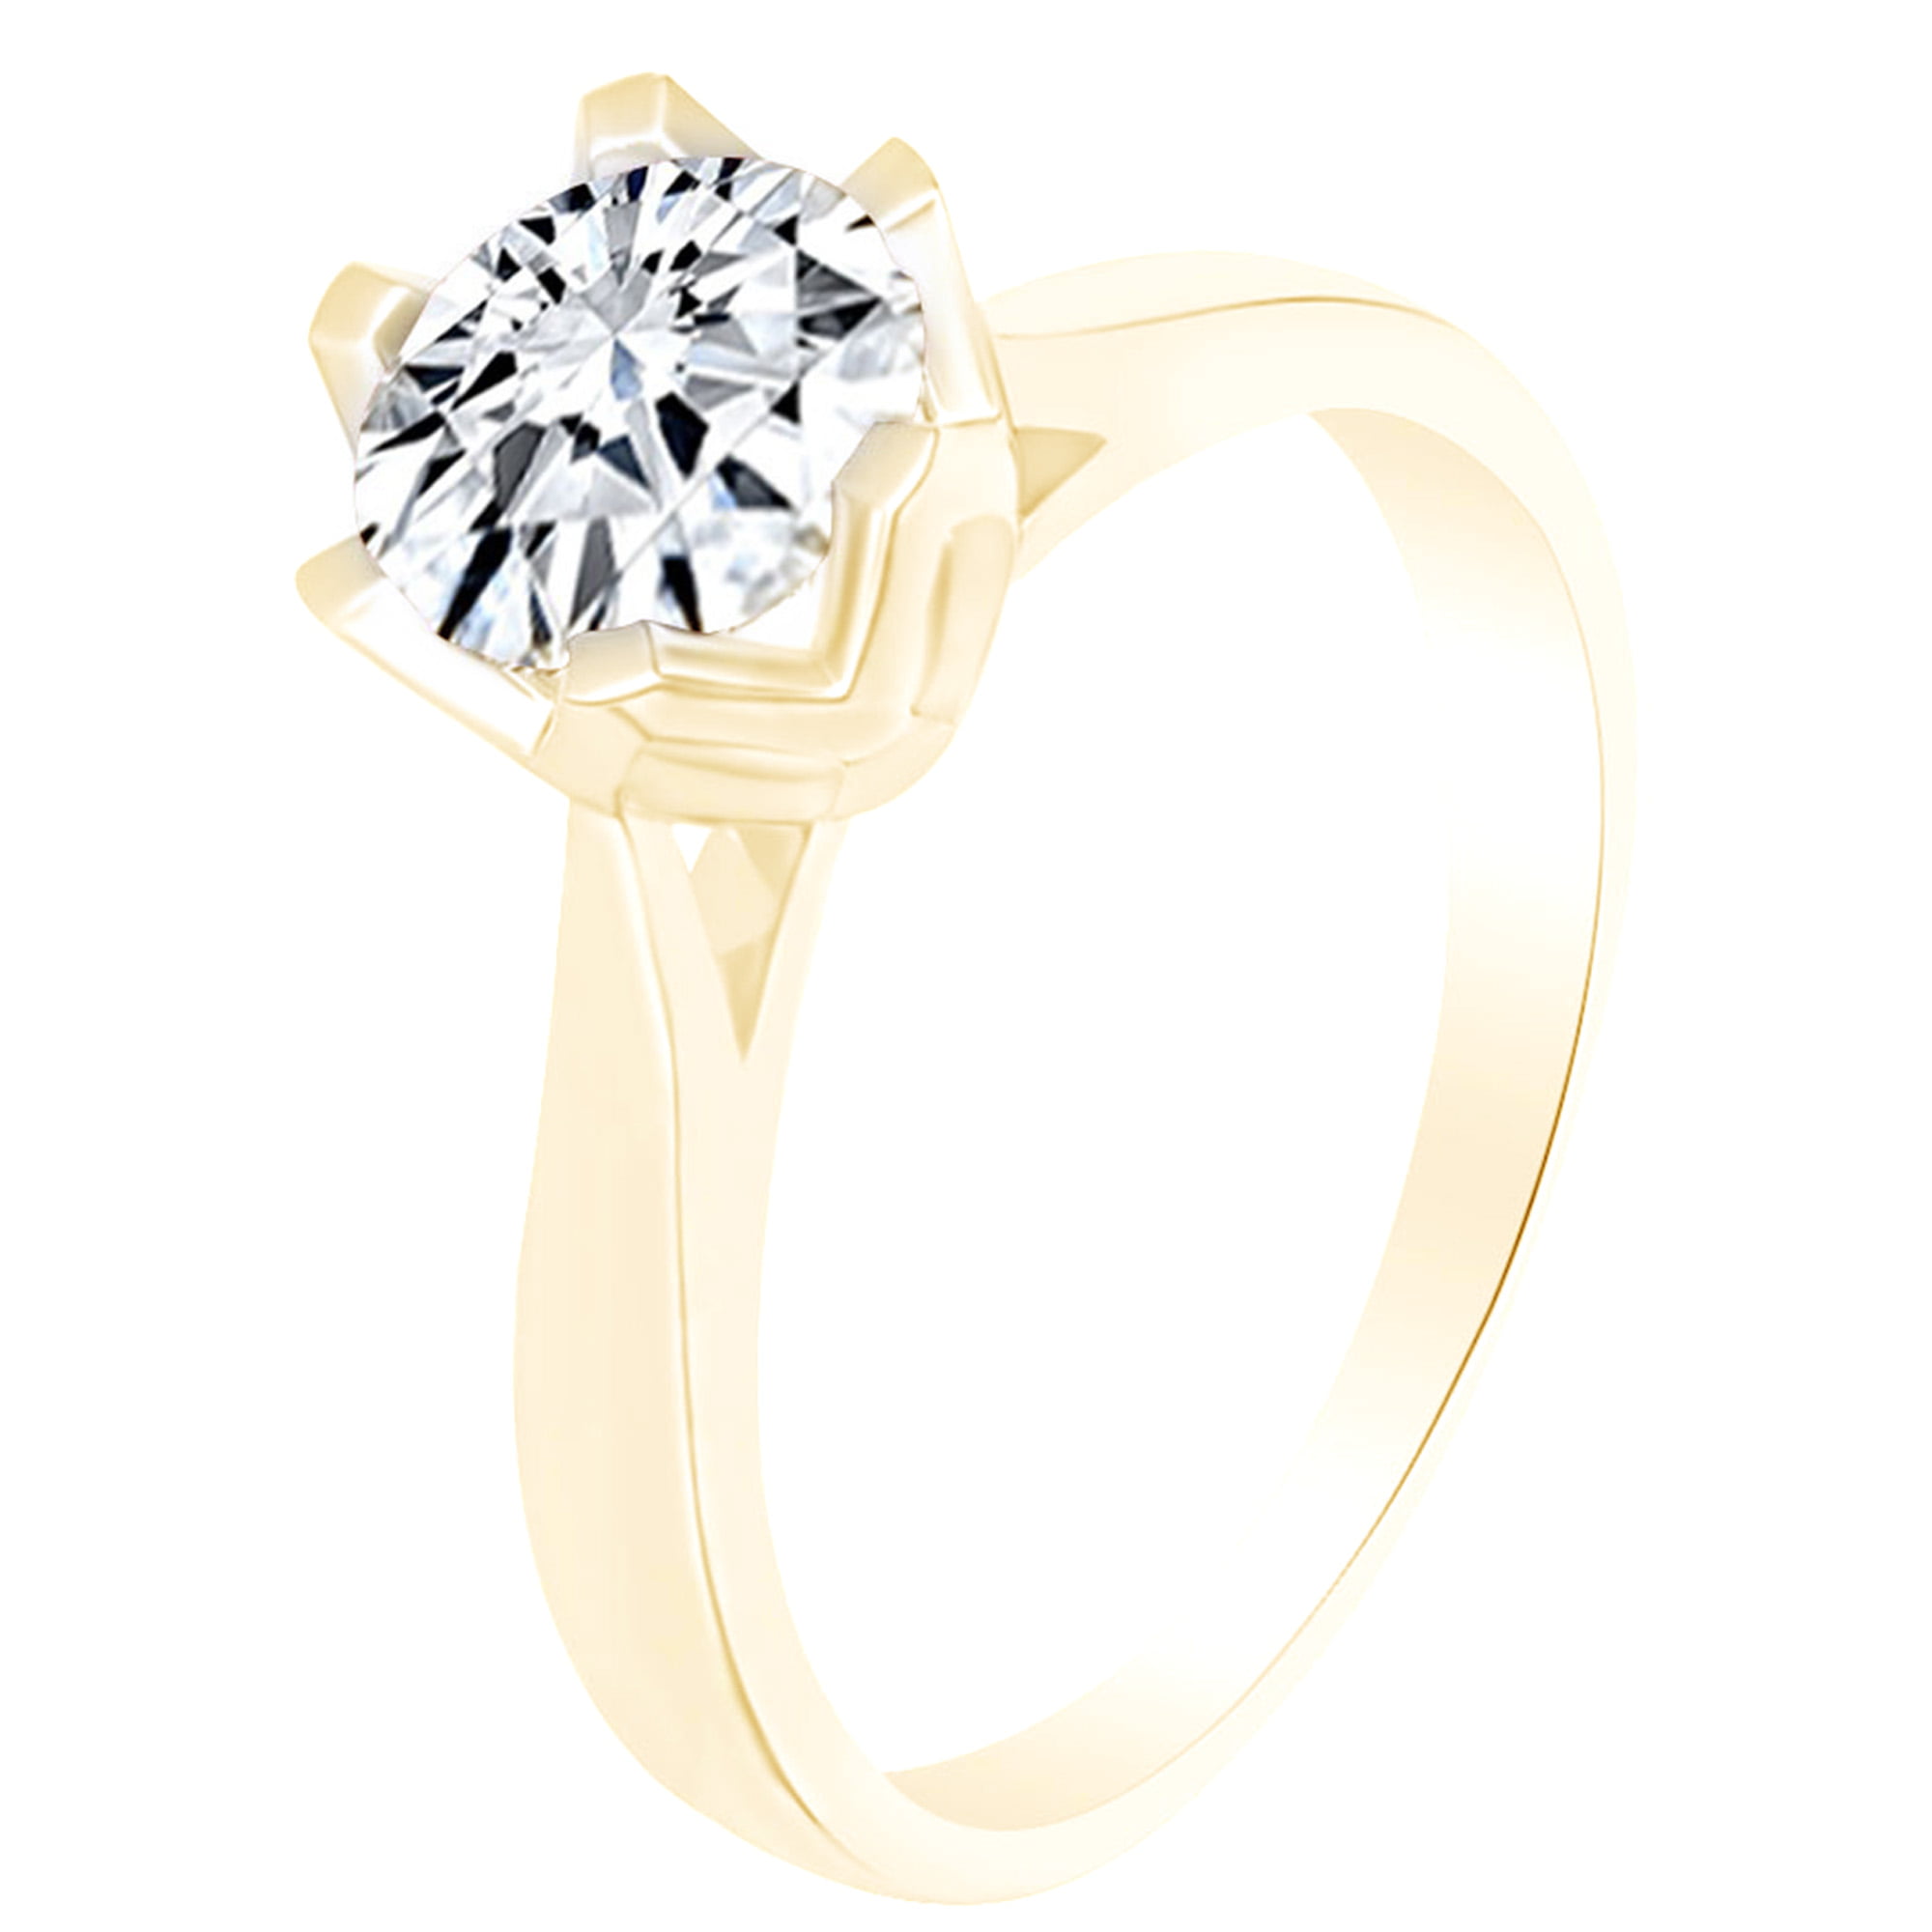 Round Cut White & Brown Cubic Zirconia Solitaire with Accent Ring in 14K Yellow Gold Over Sterling Silver 